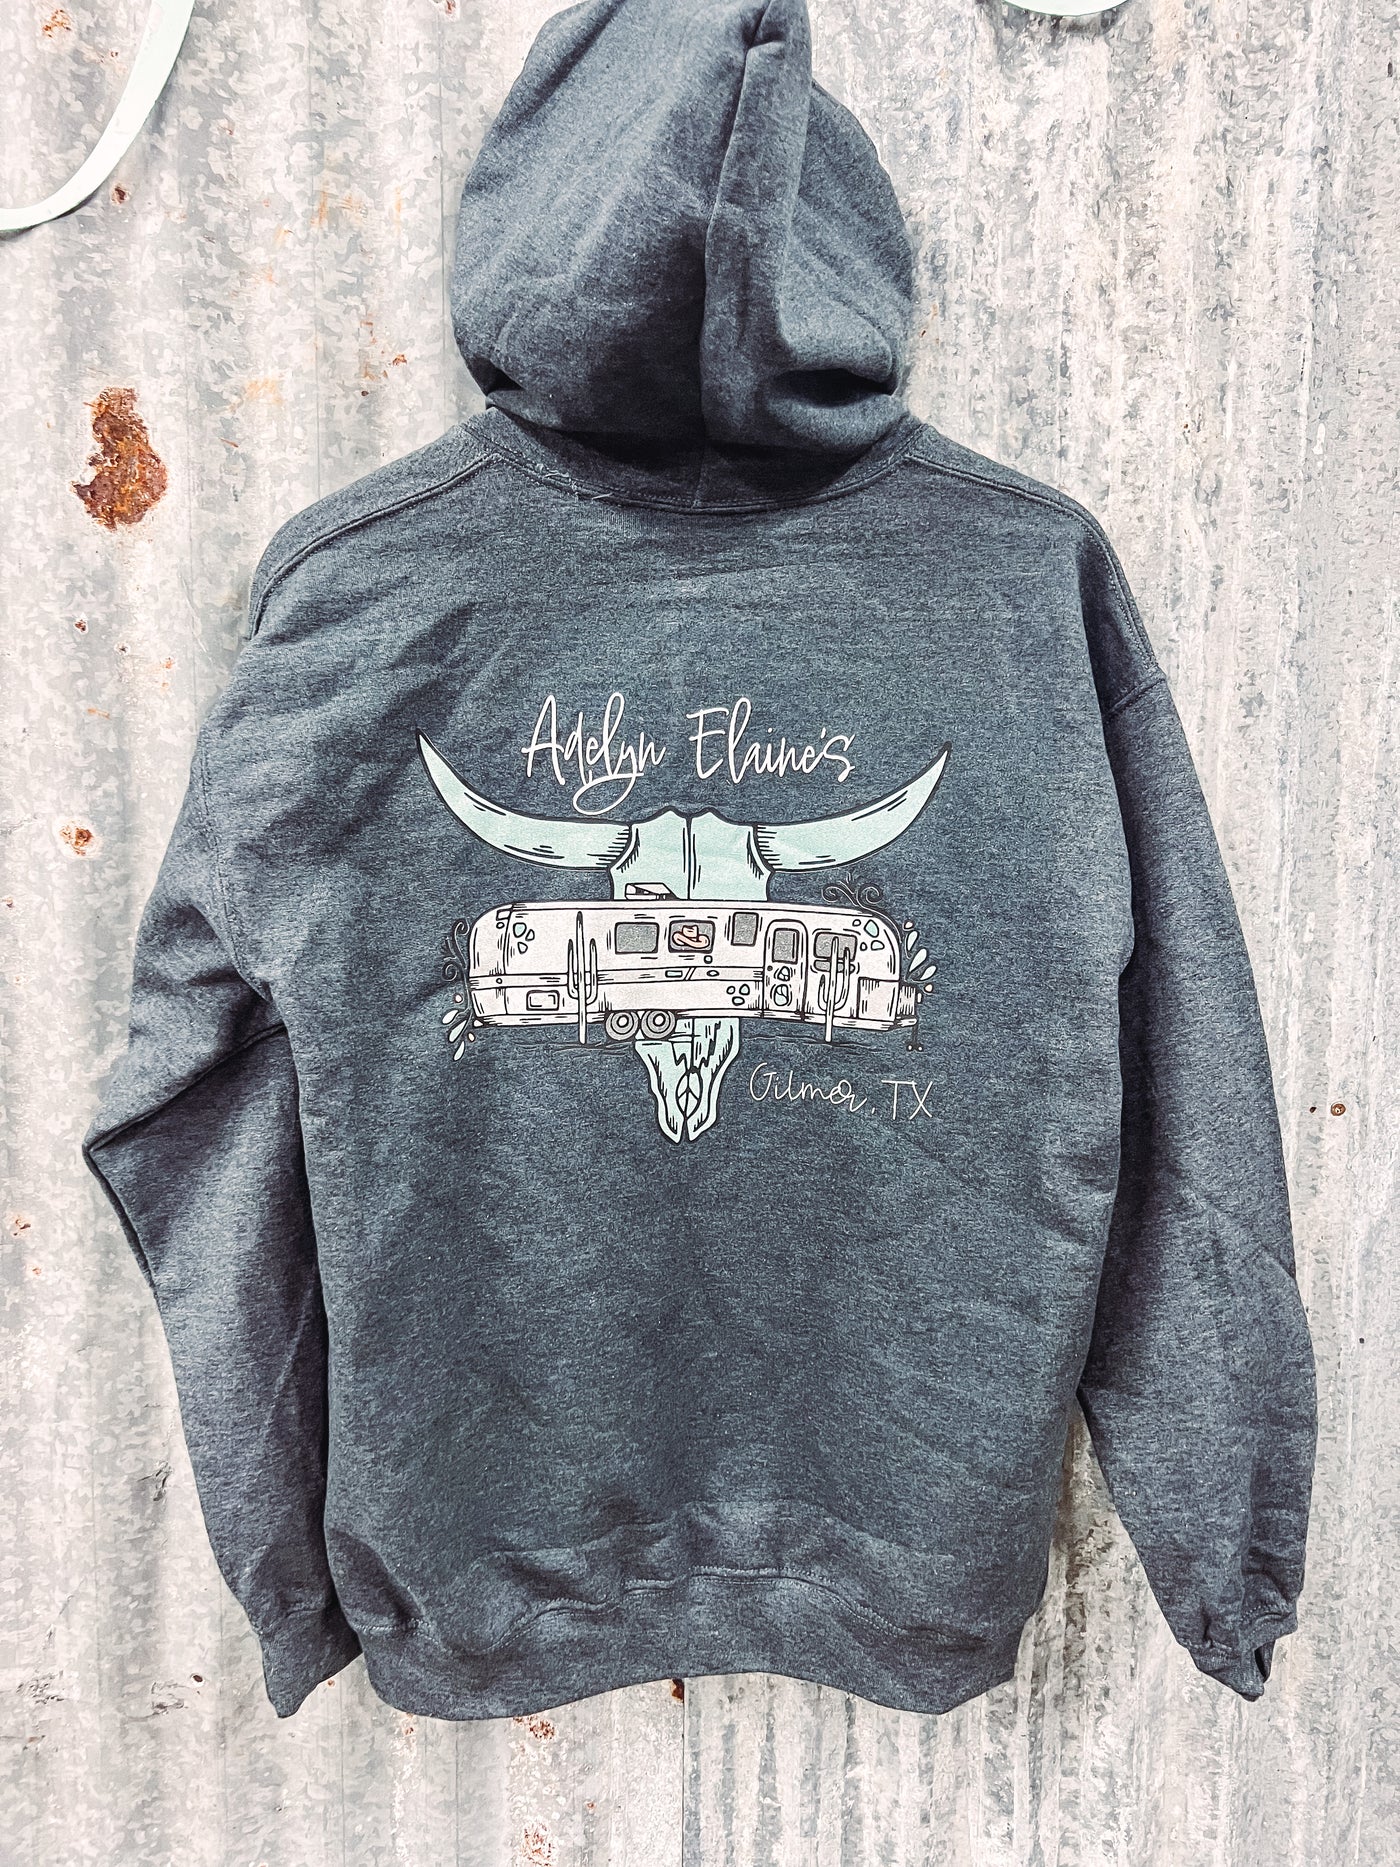 Fancy - Logo Hoodie - XL left-112 SWEATERS & CARDIGANS-Adelyn Elaine's-Adelyn Elaine's Boutique, Women's Clothing Boutique in Gilmer, TX